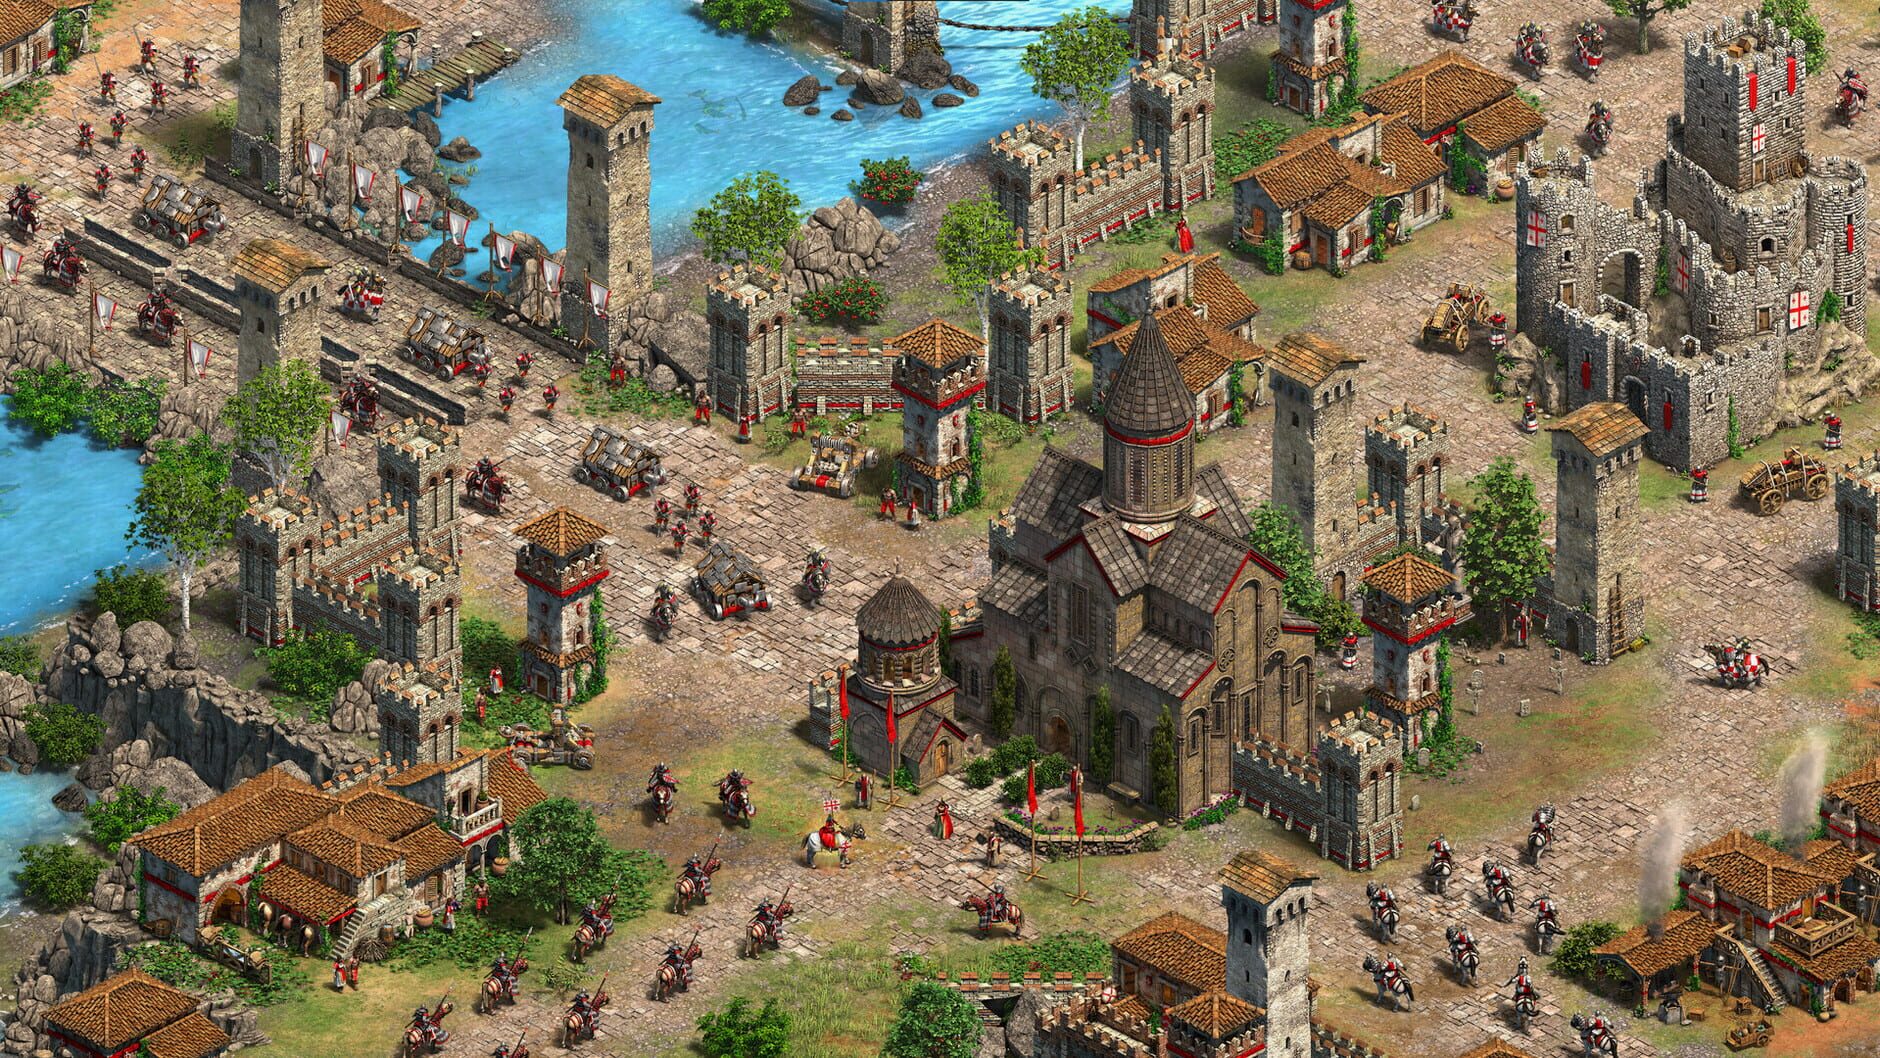 Screenshot for Age of Empires II: Definitive Edition - The Mountain Royals